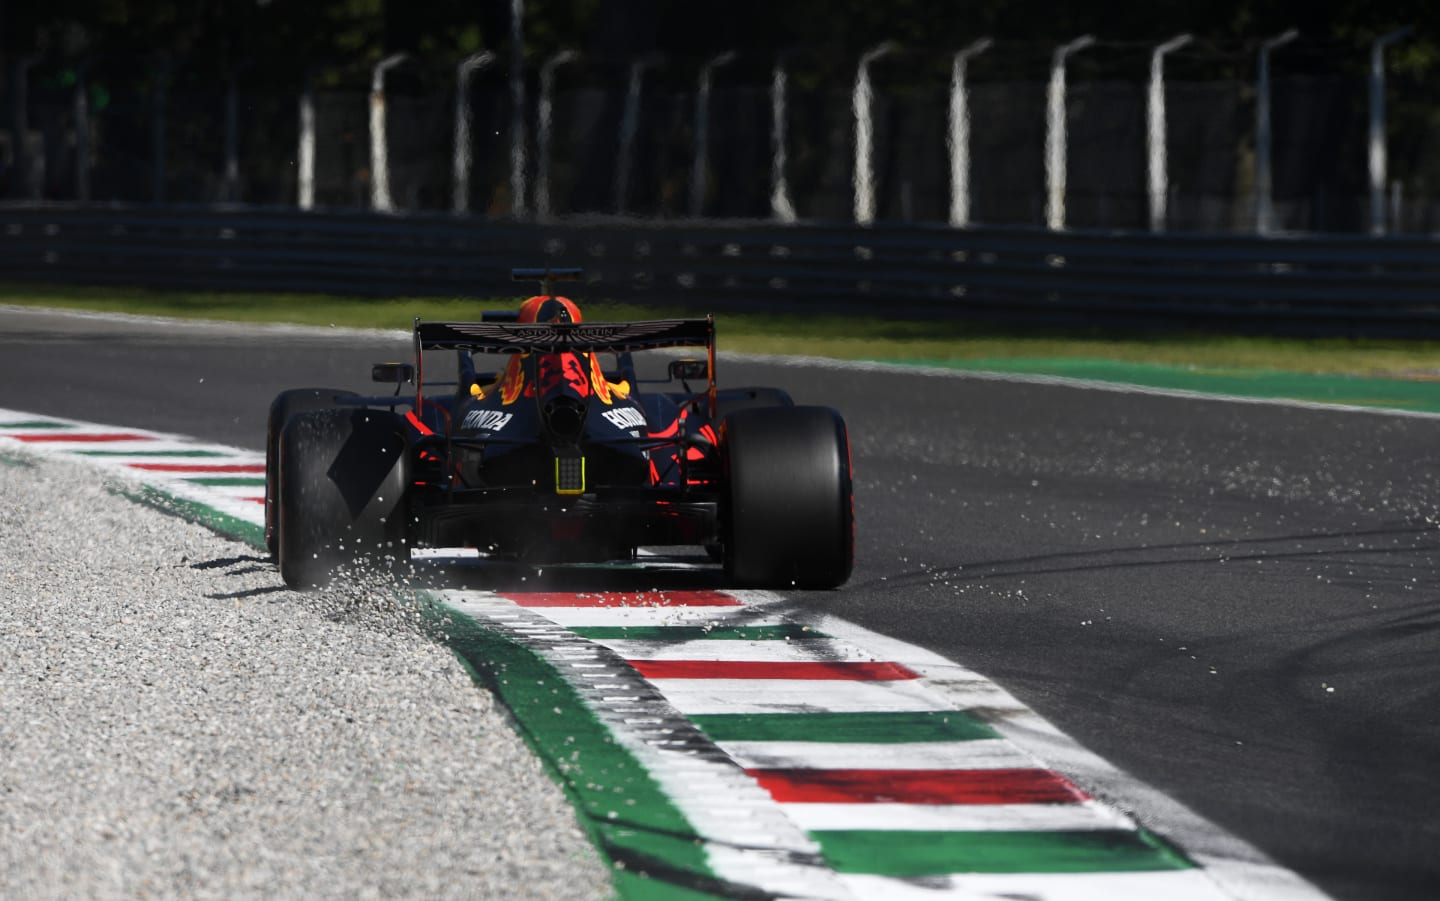 MONZA, ITALY - SEPTEMBER 05: Max Verstappen of the Netherlands driving the (33) Aston Martin Red